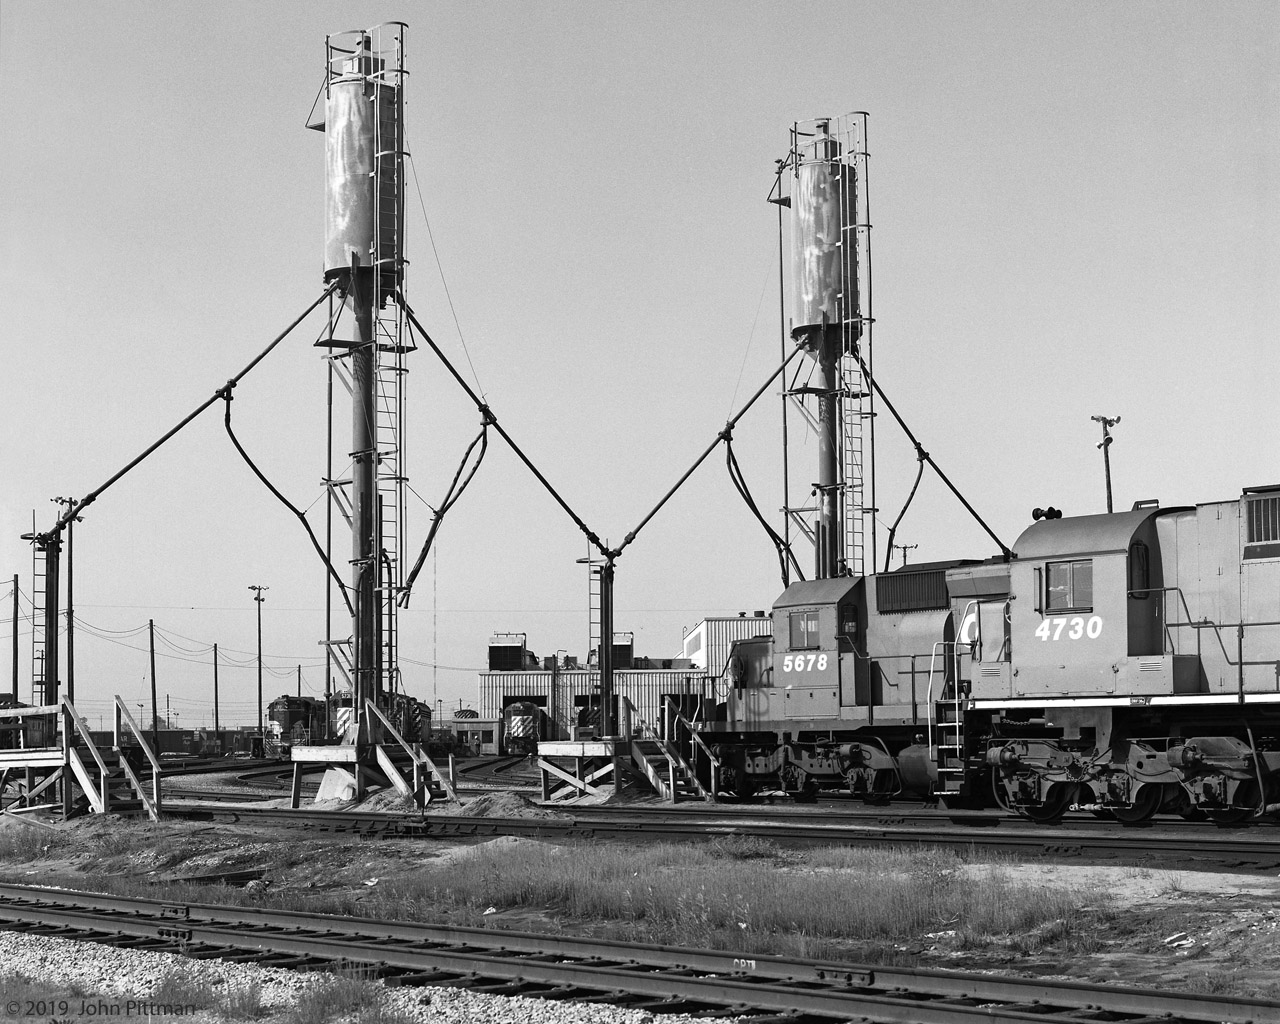 CP's Toronto Yard locomotive sand refill area more than 40 years ago, before it was modernized.
SD40-2 CP 5678 is in position for filling the front sandbox, while M636 CP 4730 is nearby.
In the background, left to right, are TH&B 77, CP 5731, CP 5537, with CP 4705 inside the diesel shop.
The official name of the diesel shop as of 2019 appears to be Locomotive Reliability Centre, based on signage visible from Finch Ave bridge.